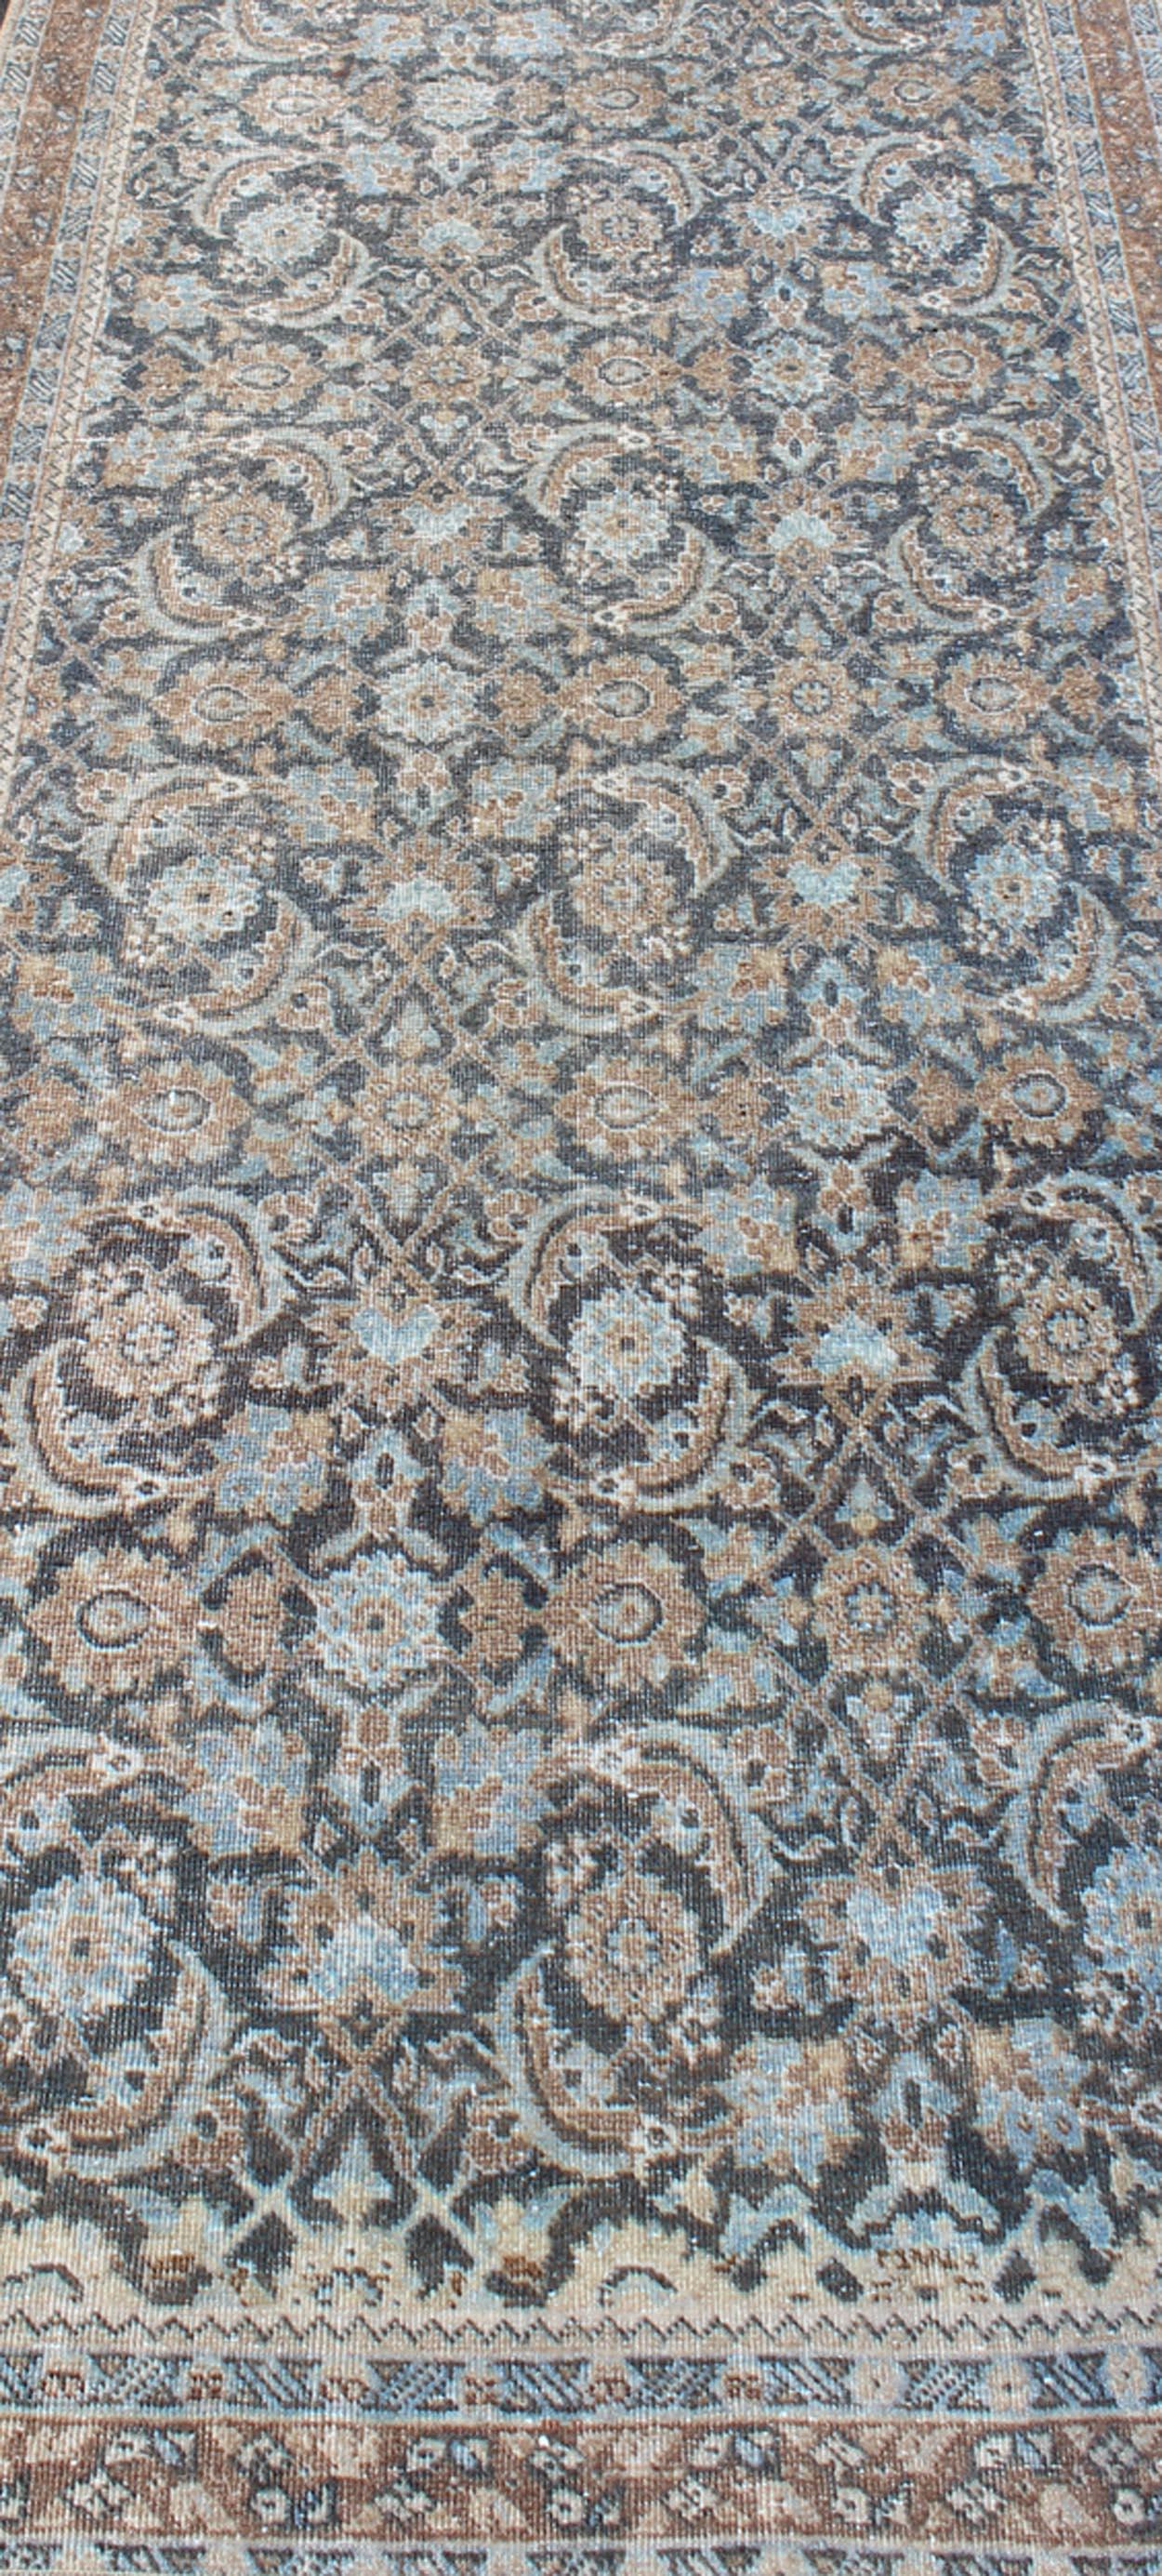 Vintage Persian Tabriz Runner with Ornate Floral Design in Blue and Taupe For Sale 5